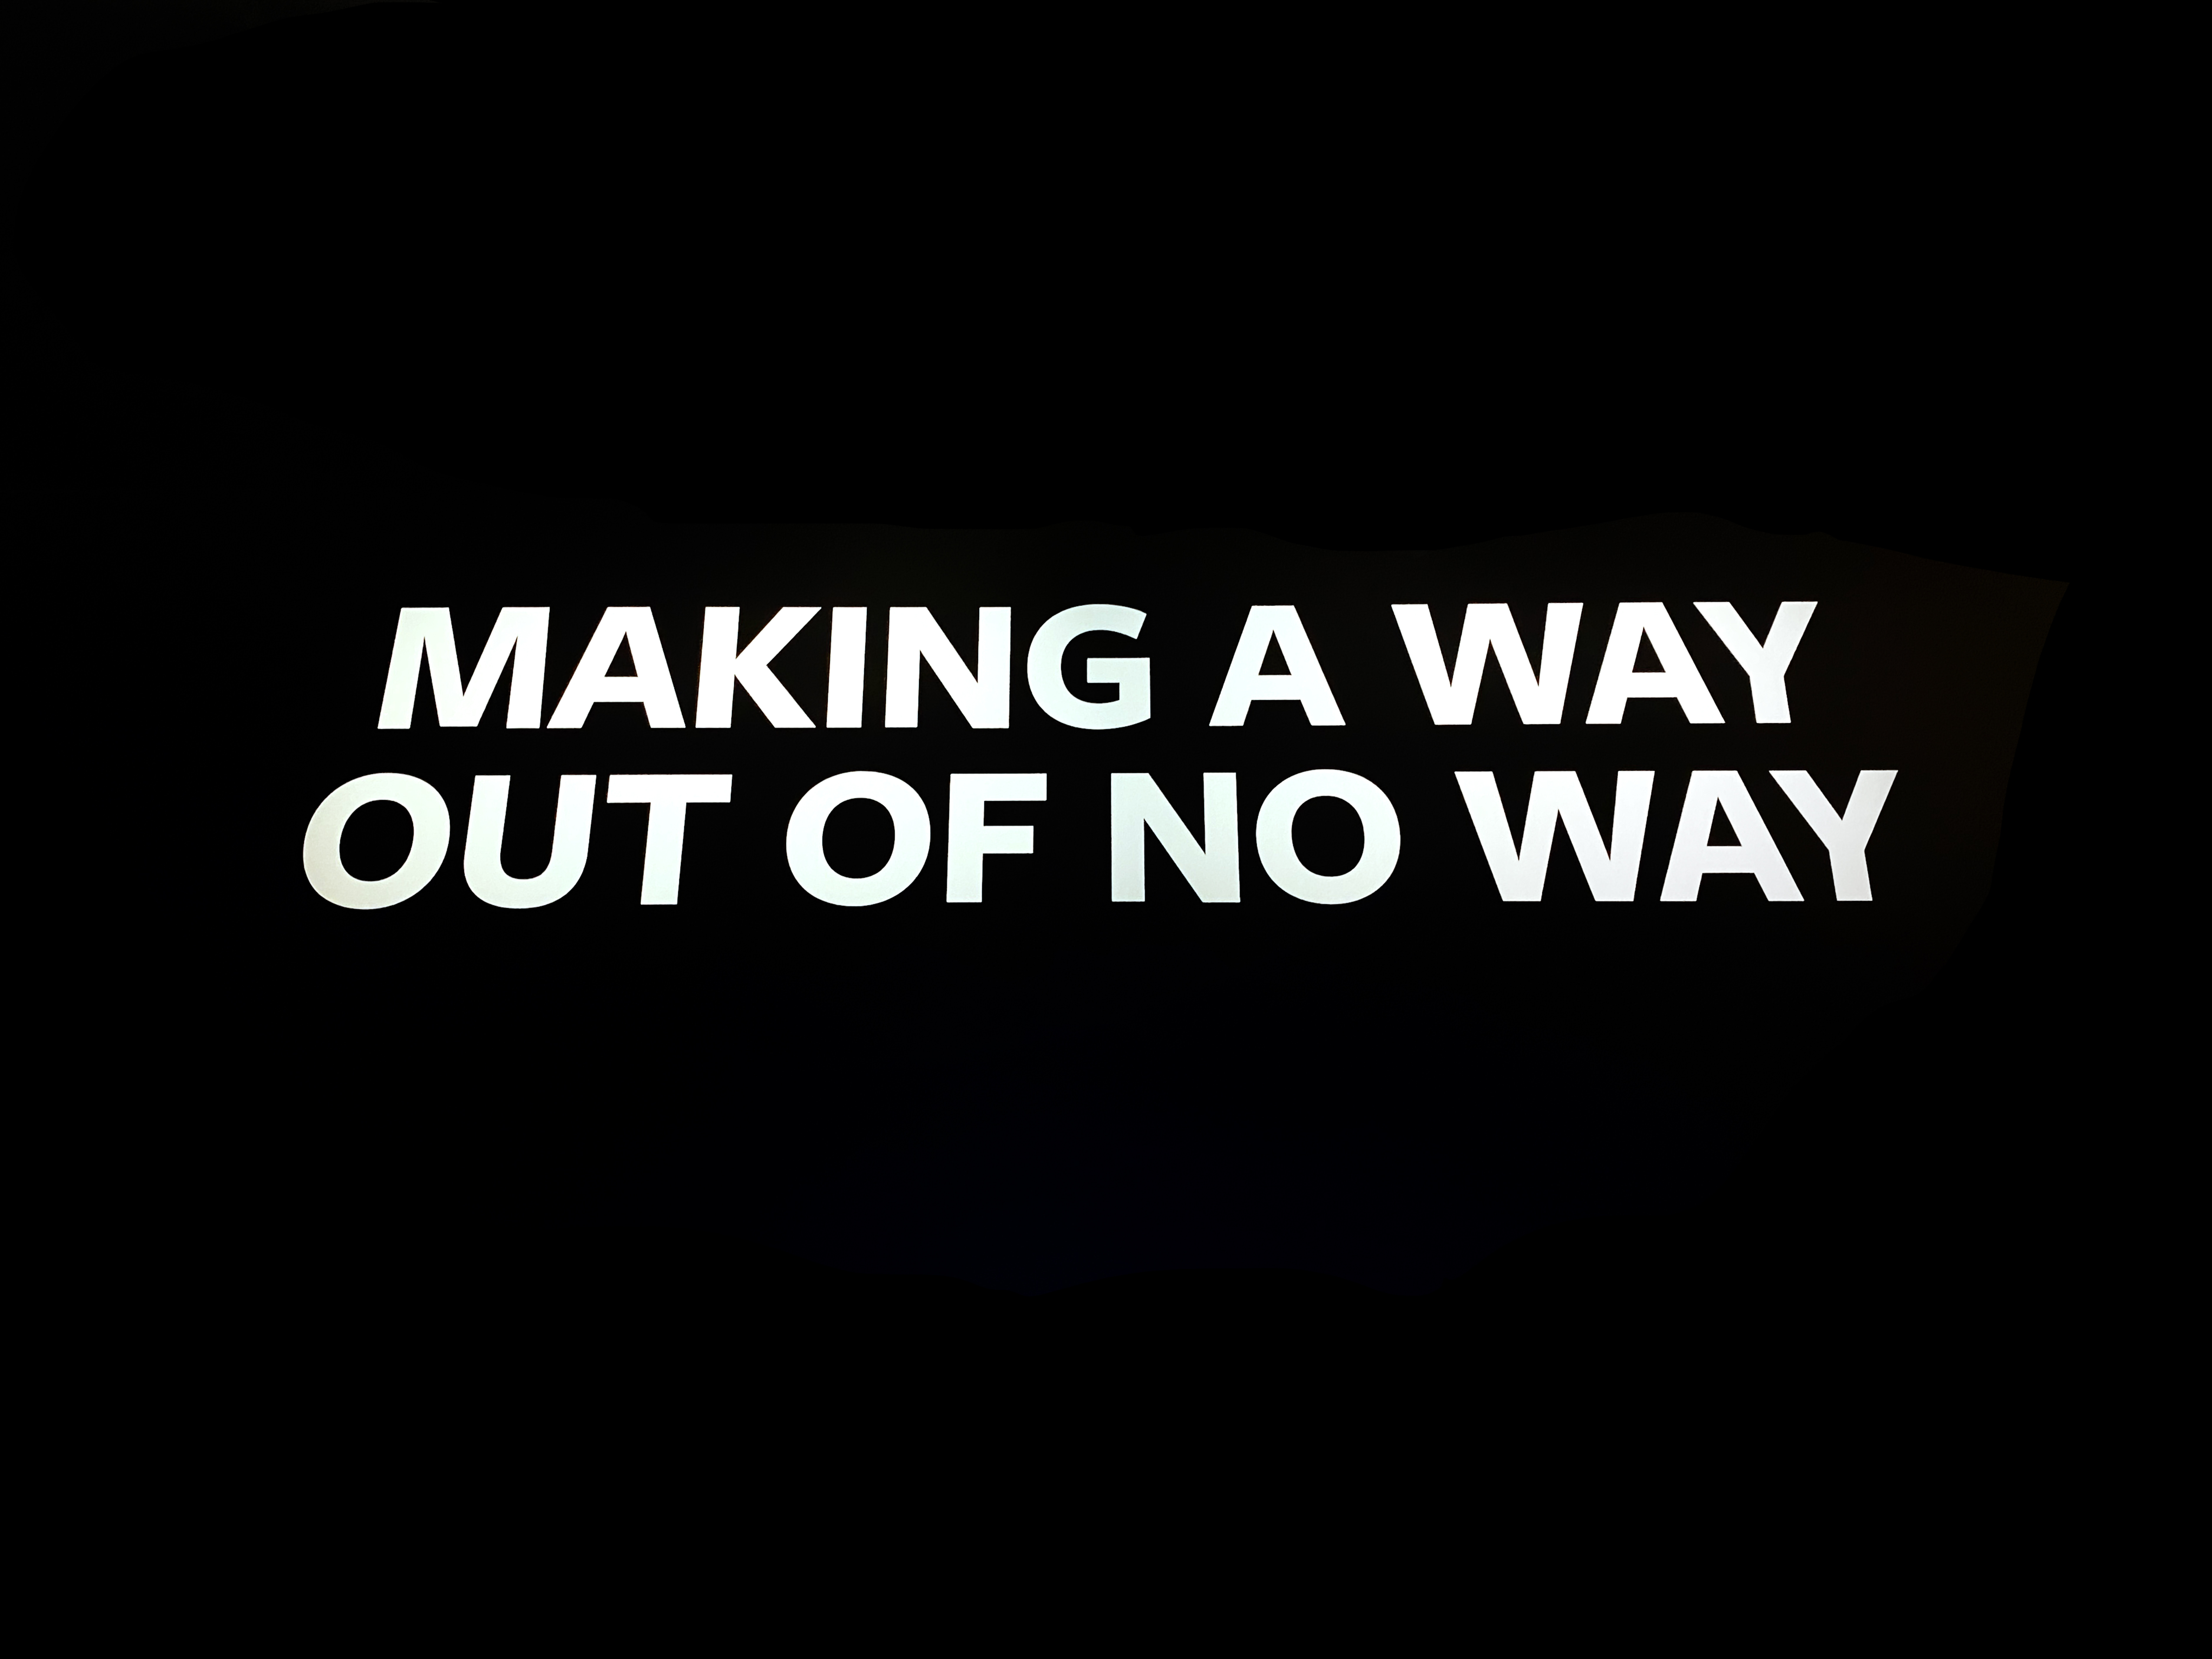 Making a way out of no way quote on a balck background